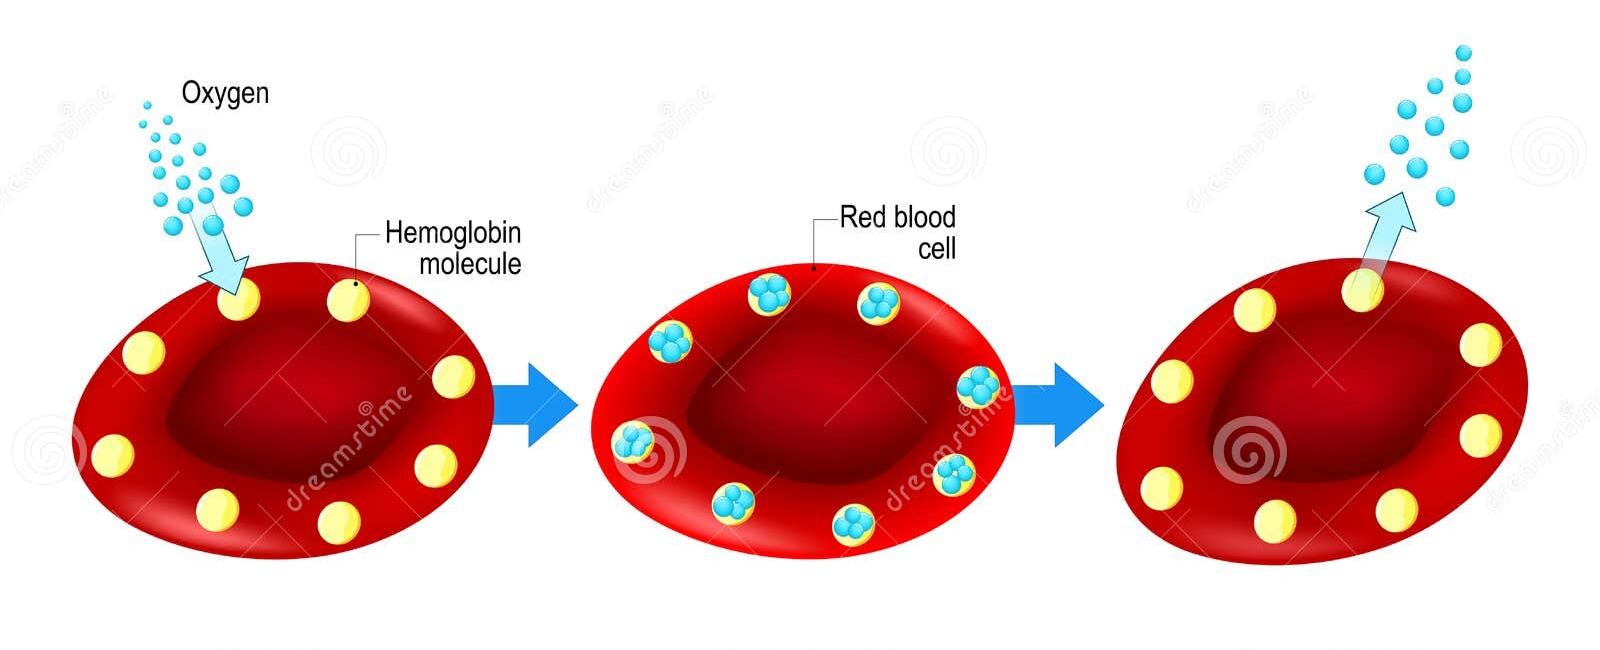 Red blood cells contain hemoglobin which is what allows them to carry oxygen